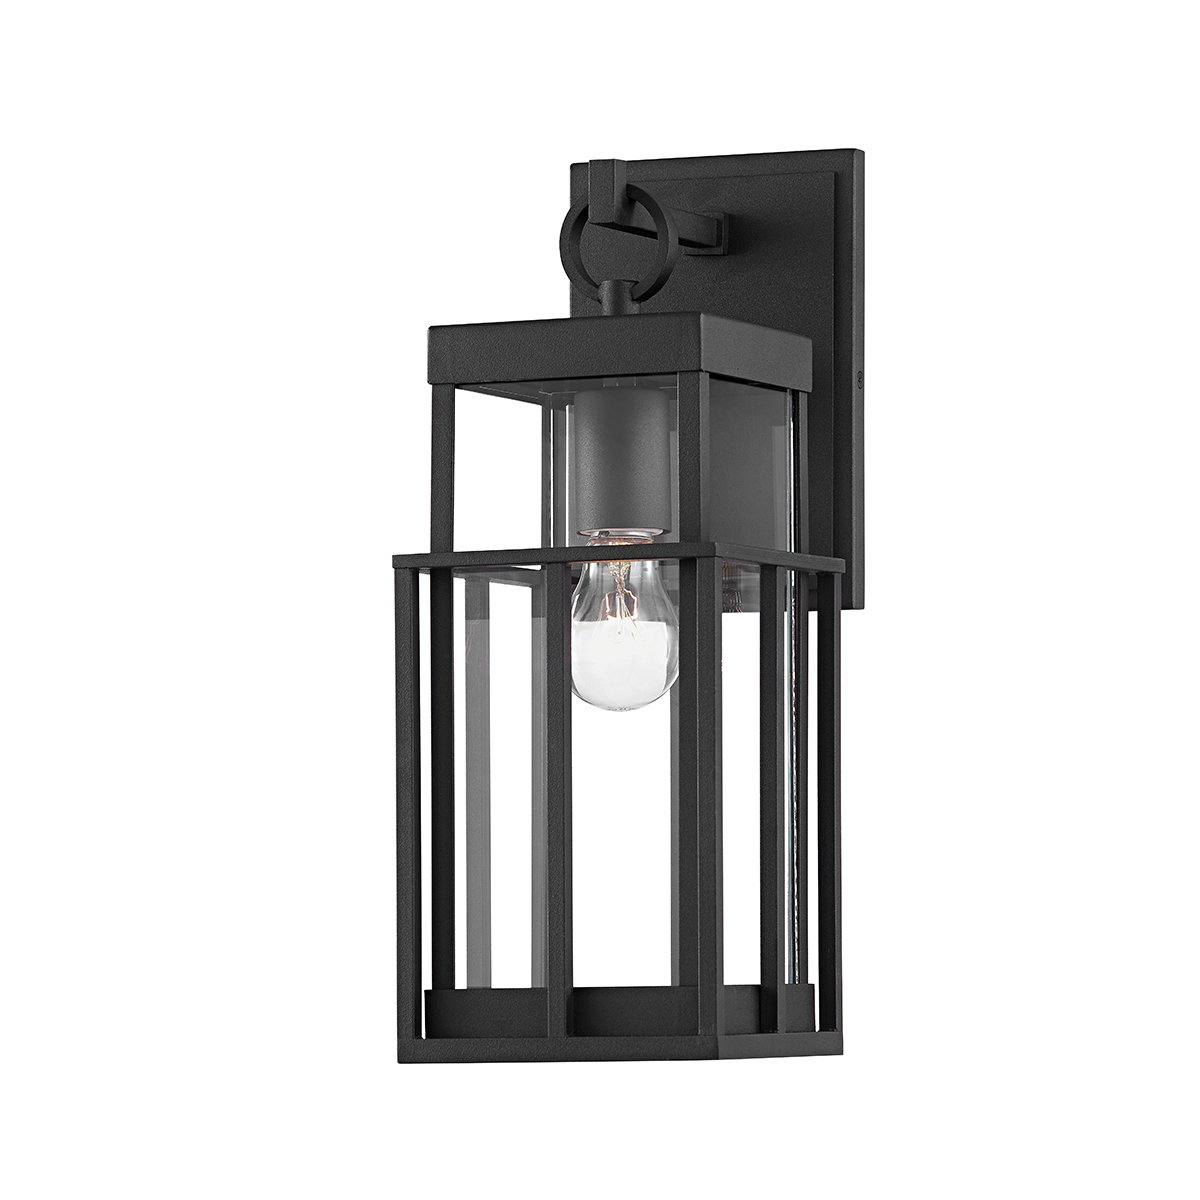 Troy LONGPORT 1 LIGHT SMALL EXTERIOR WALL SCONCE B6481 Outdoor l Wall Troy Lighting TEXTURE BLACK  